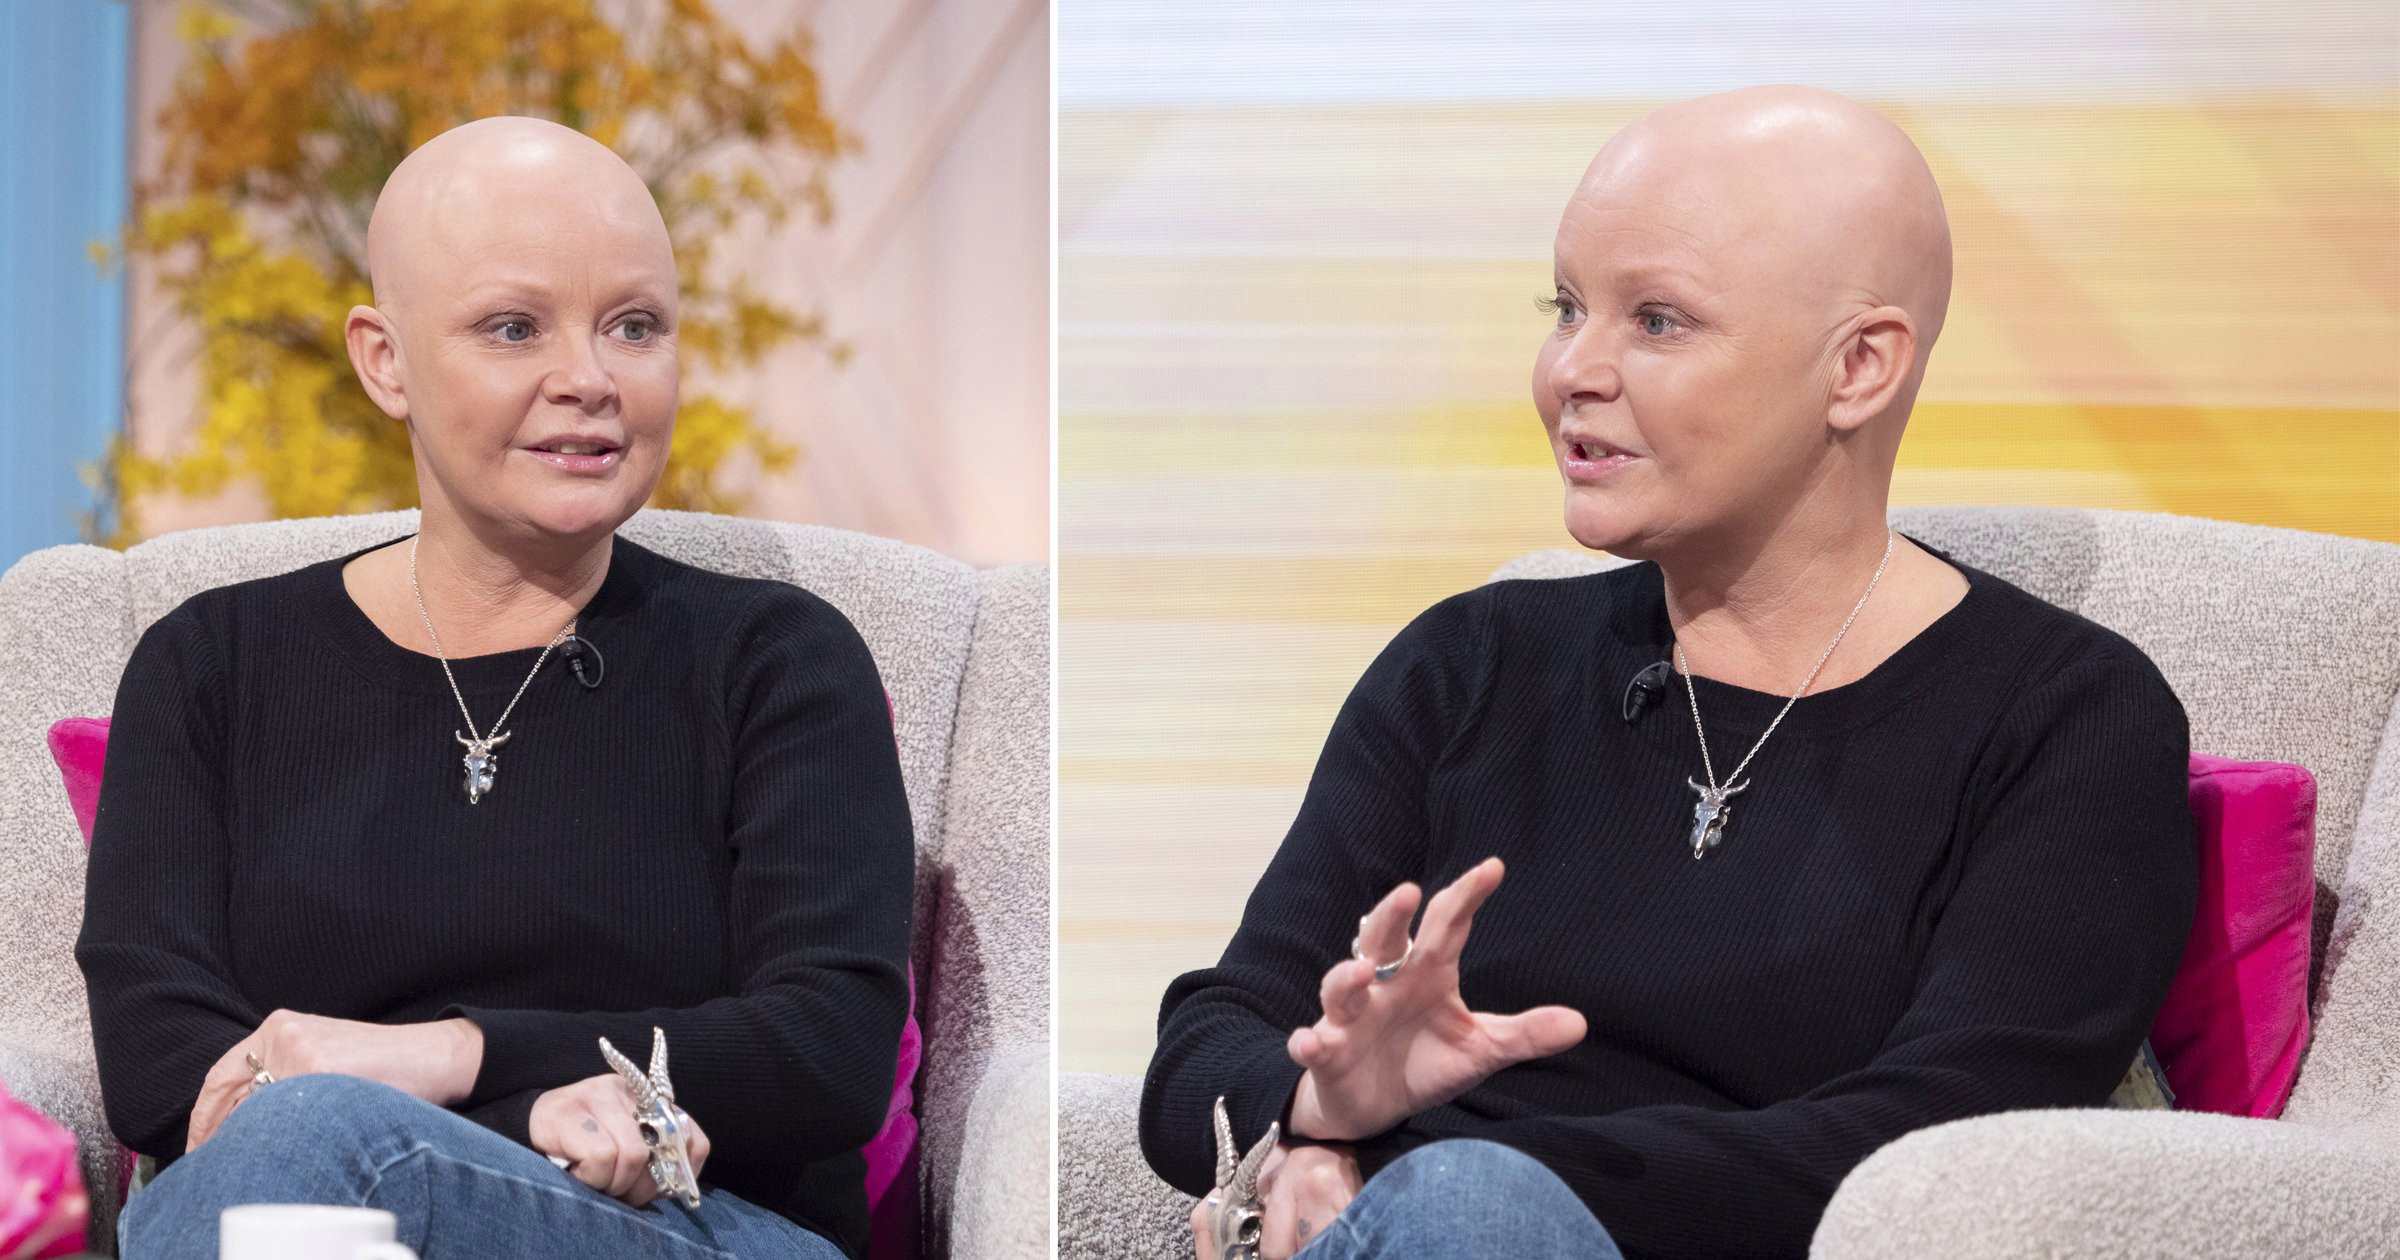 Gail Porter ‘rejected’ from Celebrity First Dates despite looking for a partner: ‘I don’t think I was right’